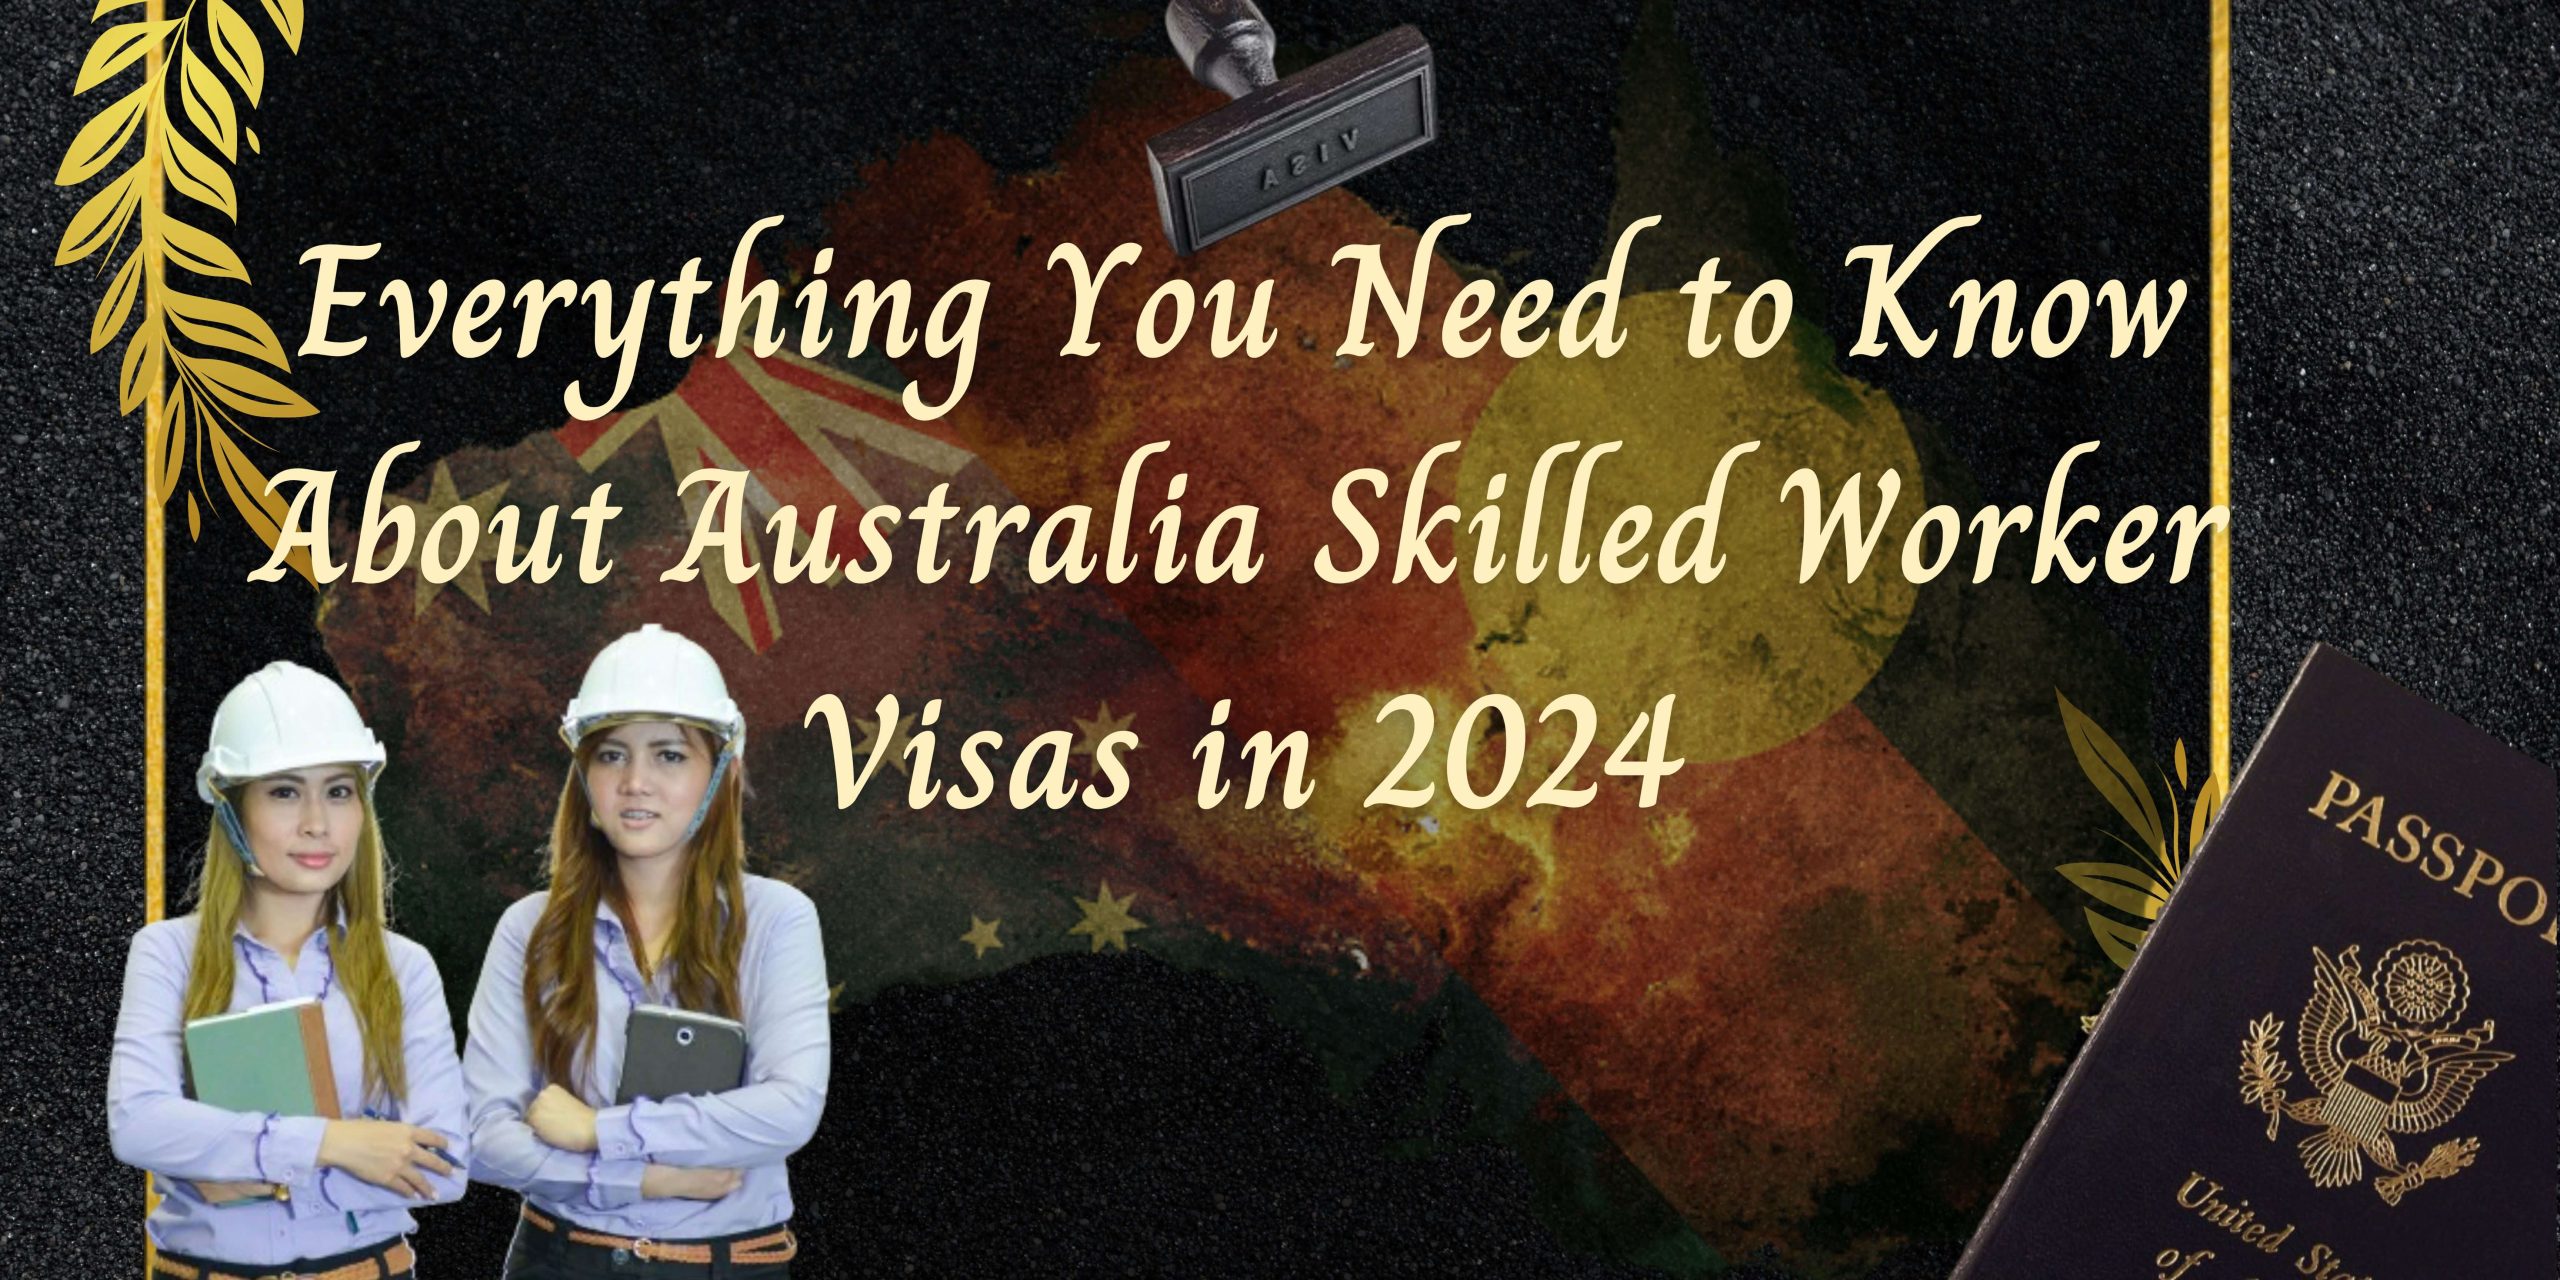 Everything You Need to Know About Australia Skilled Worker Visas in 2024